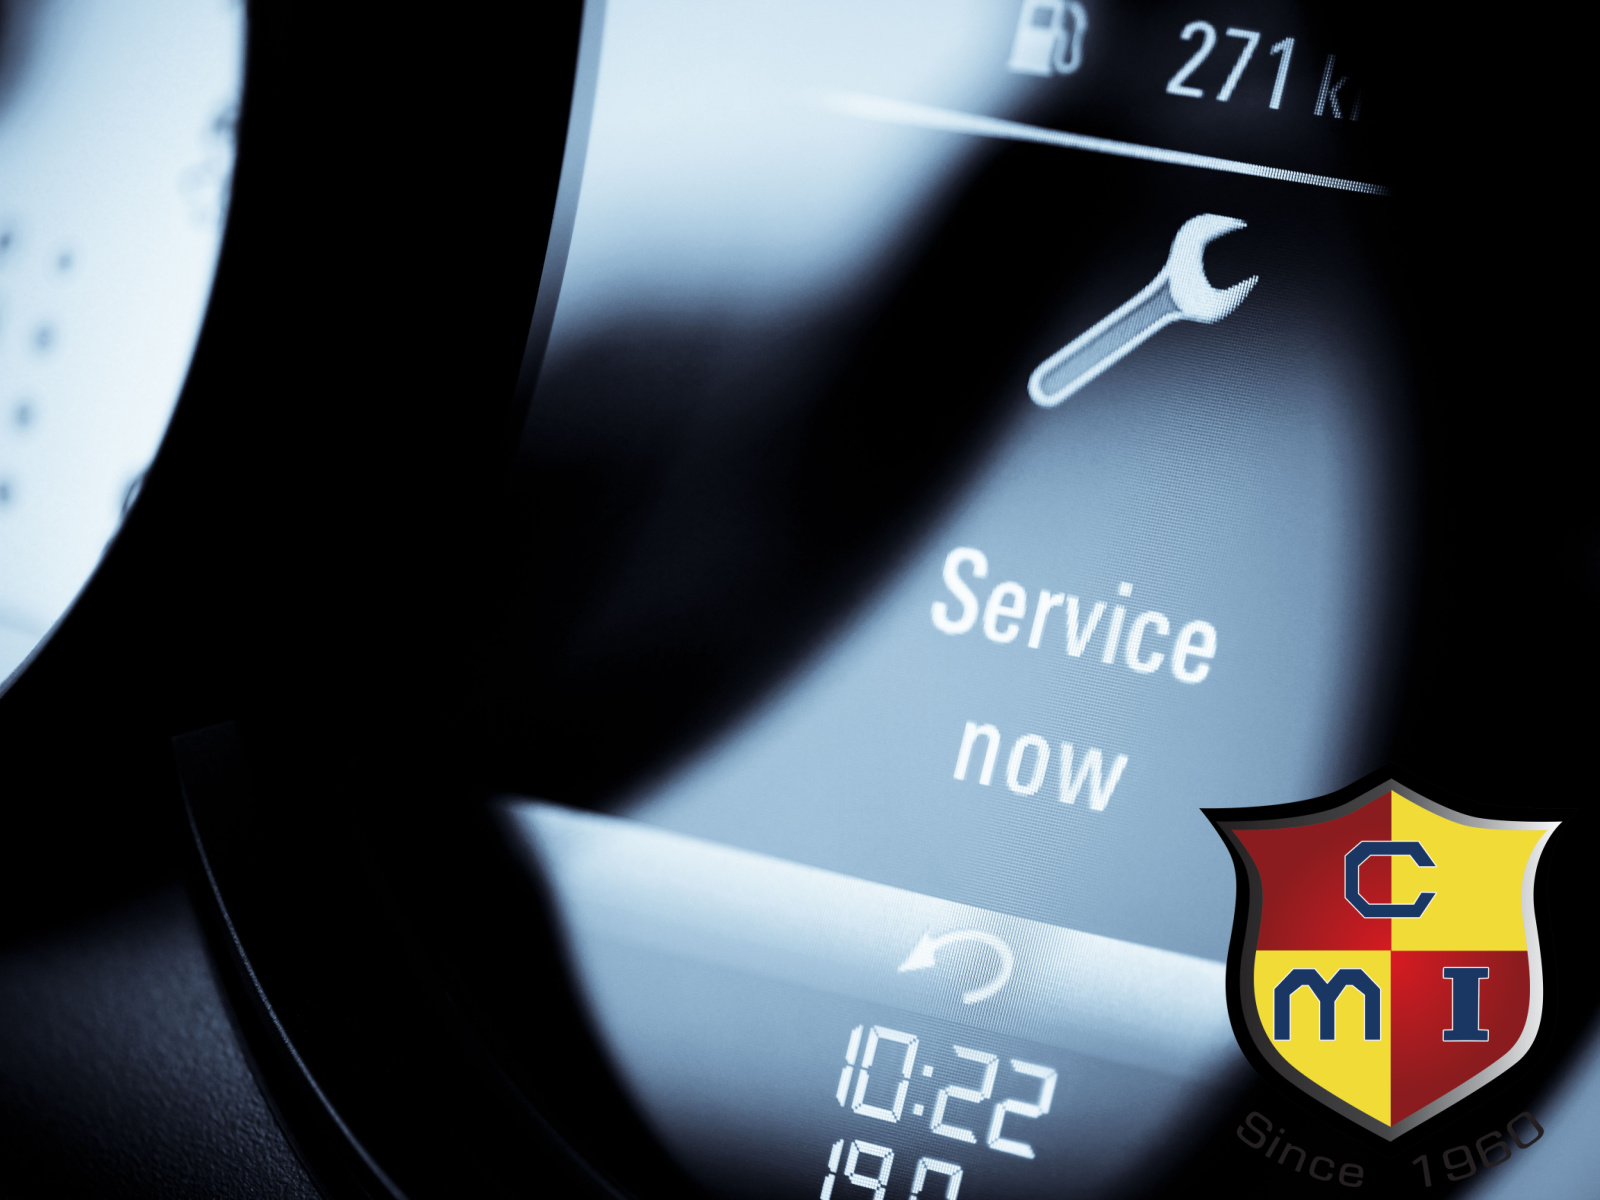 Visit Us for Asian Auto Repair Services Near Mill Creek